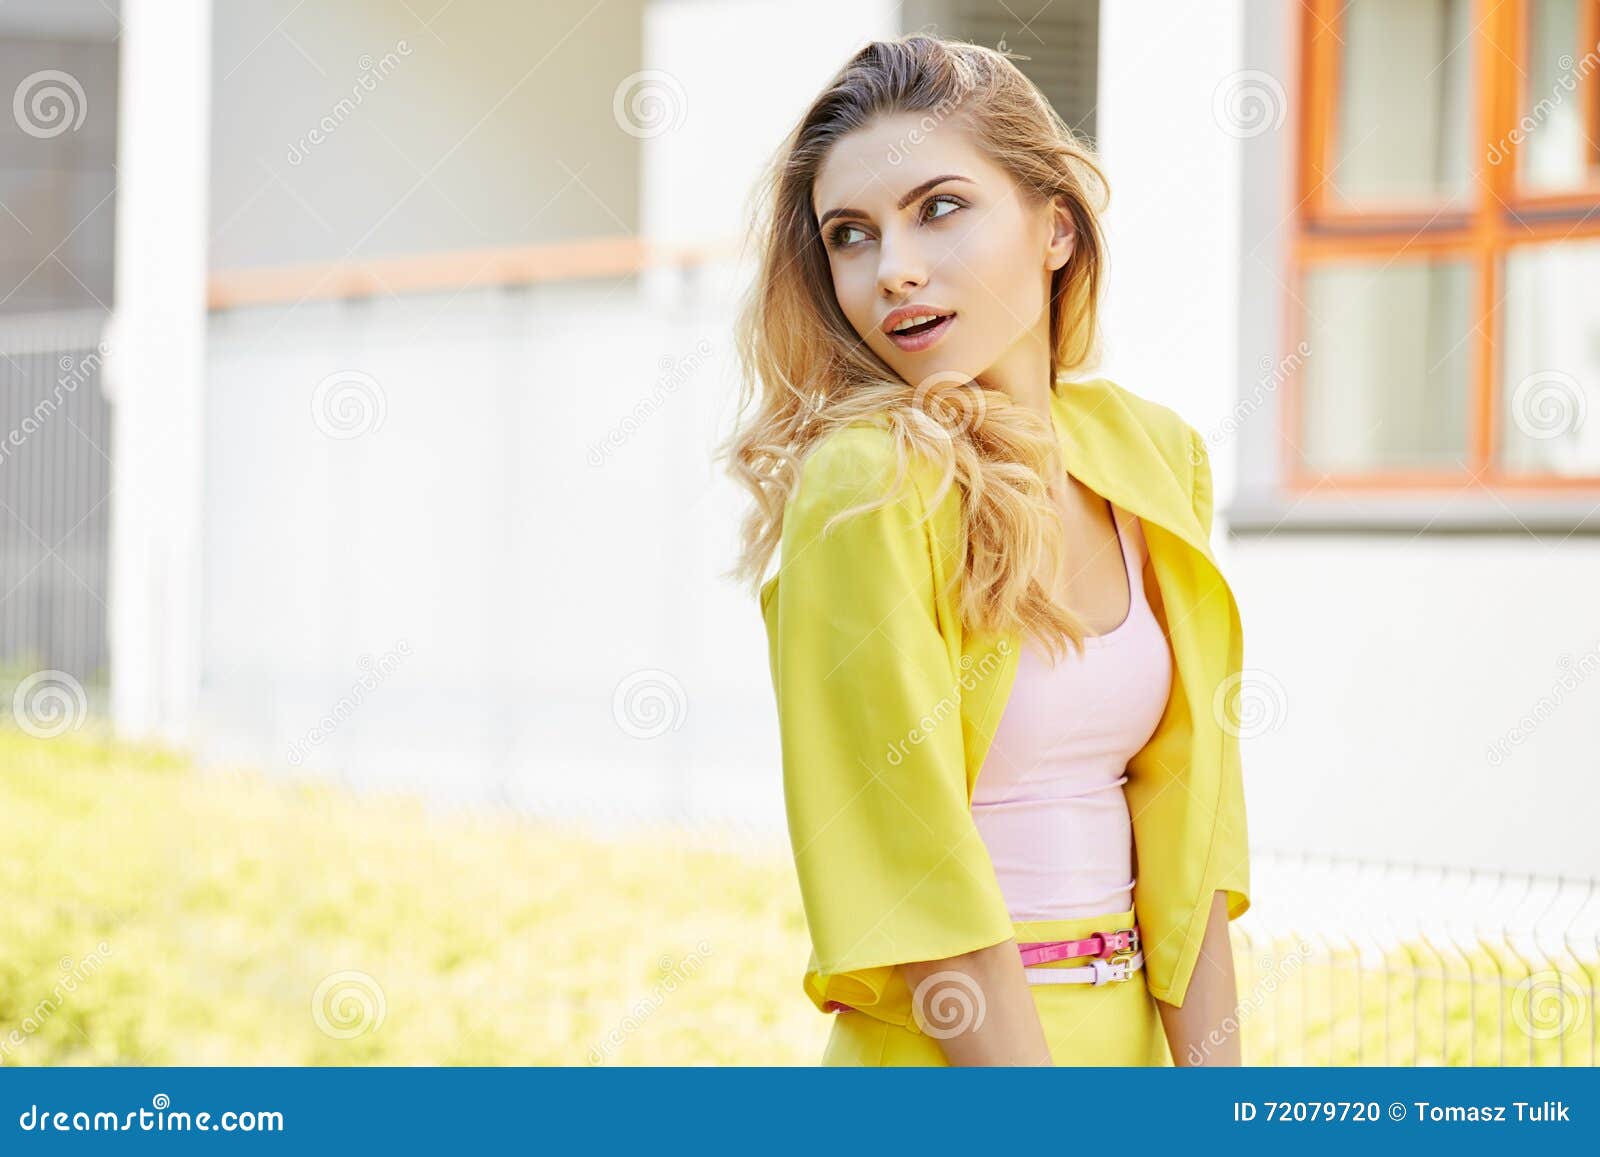 Beautiful Blonde Young Woman Walking on the Street Stock Photo - Image ...